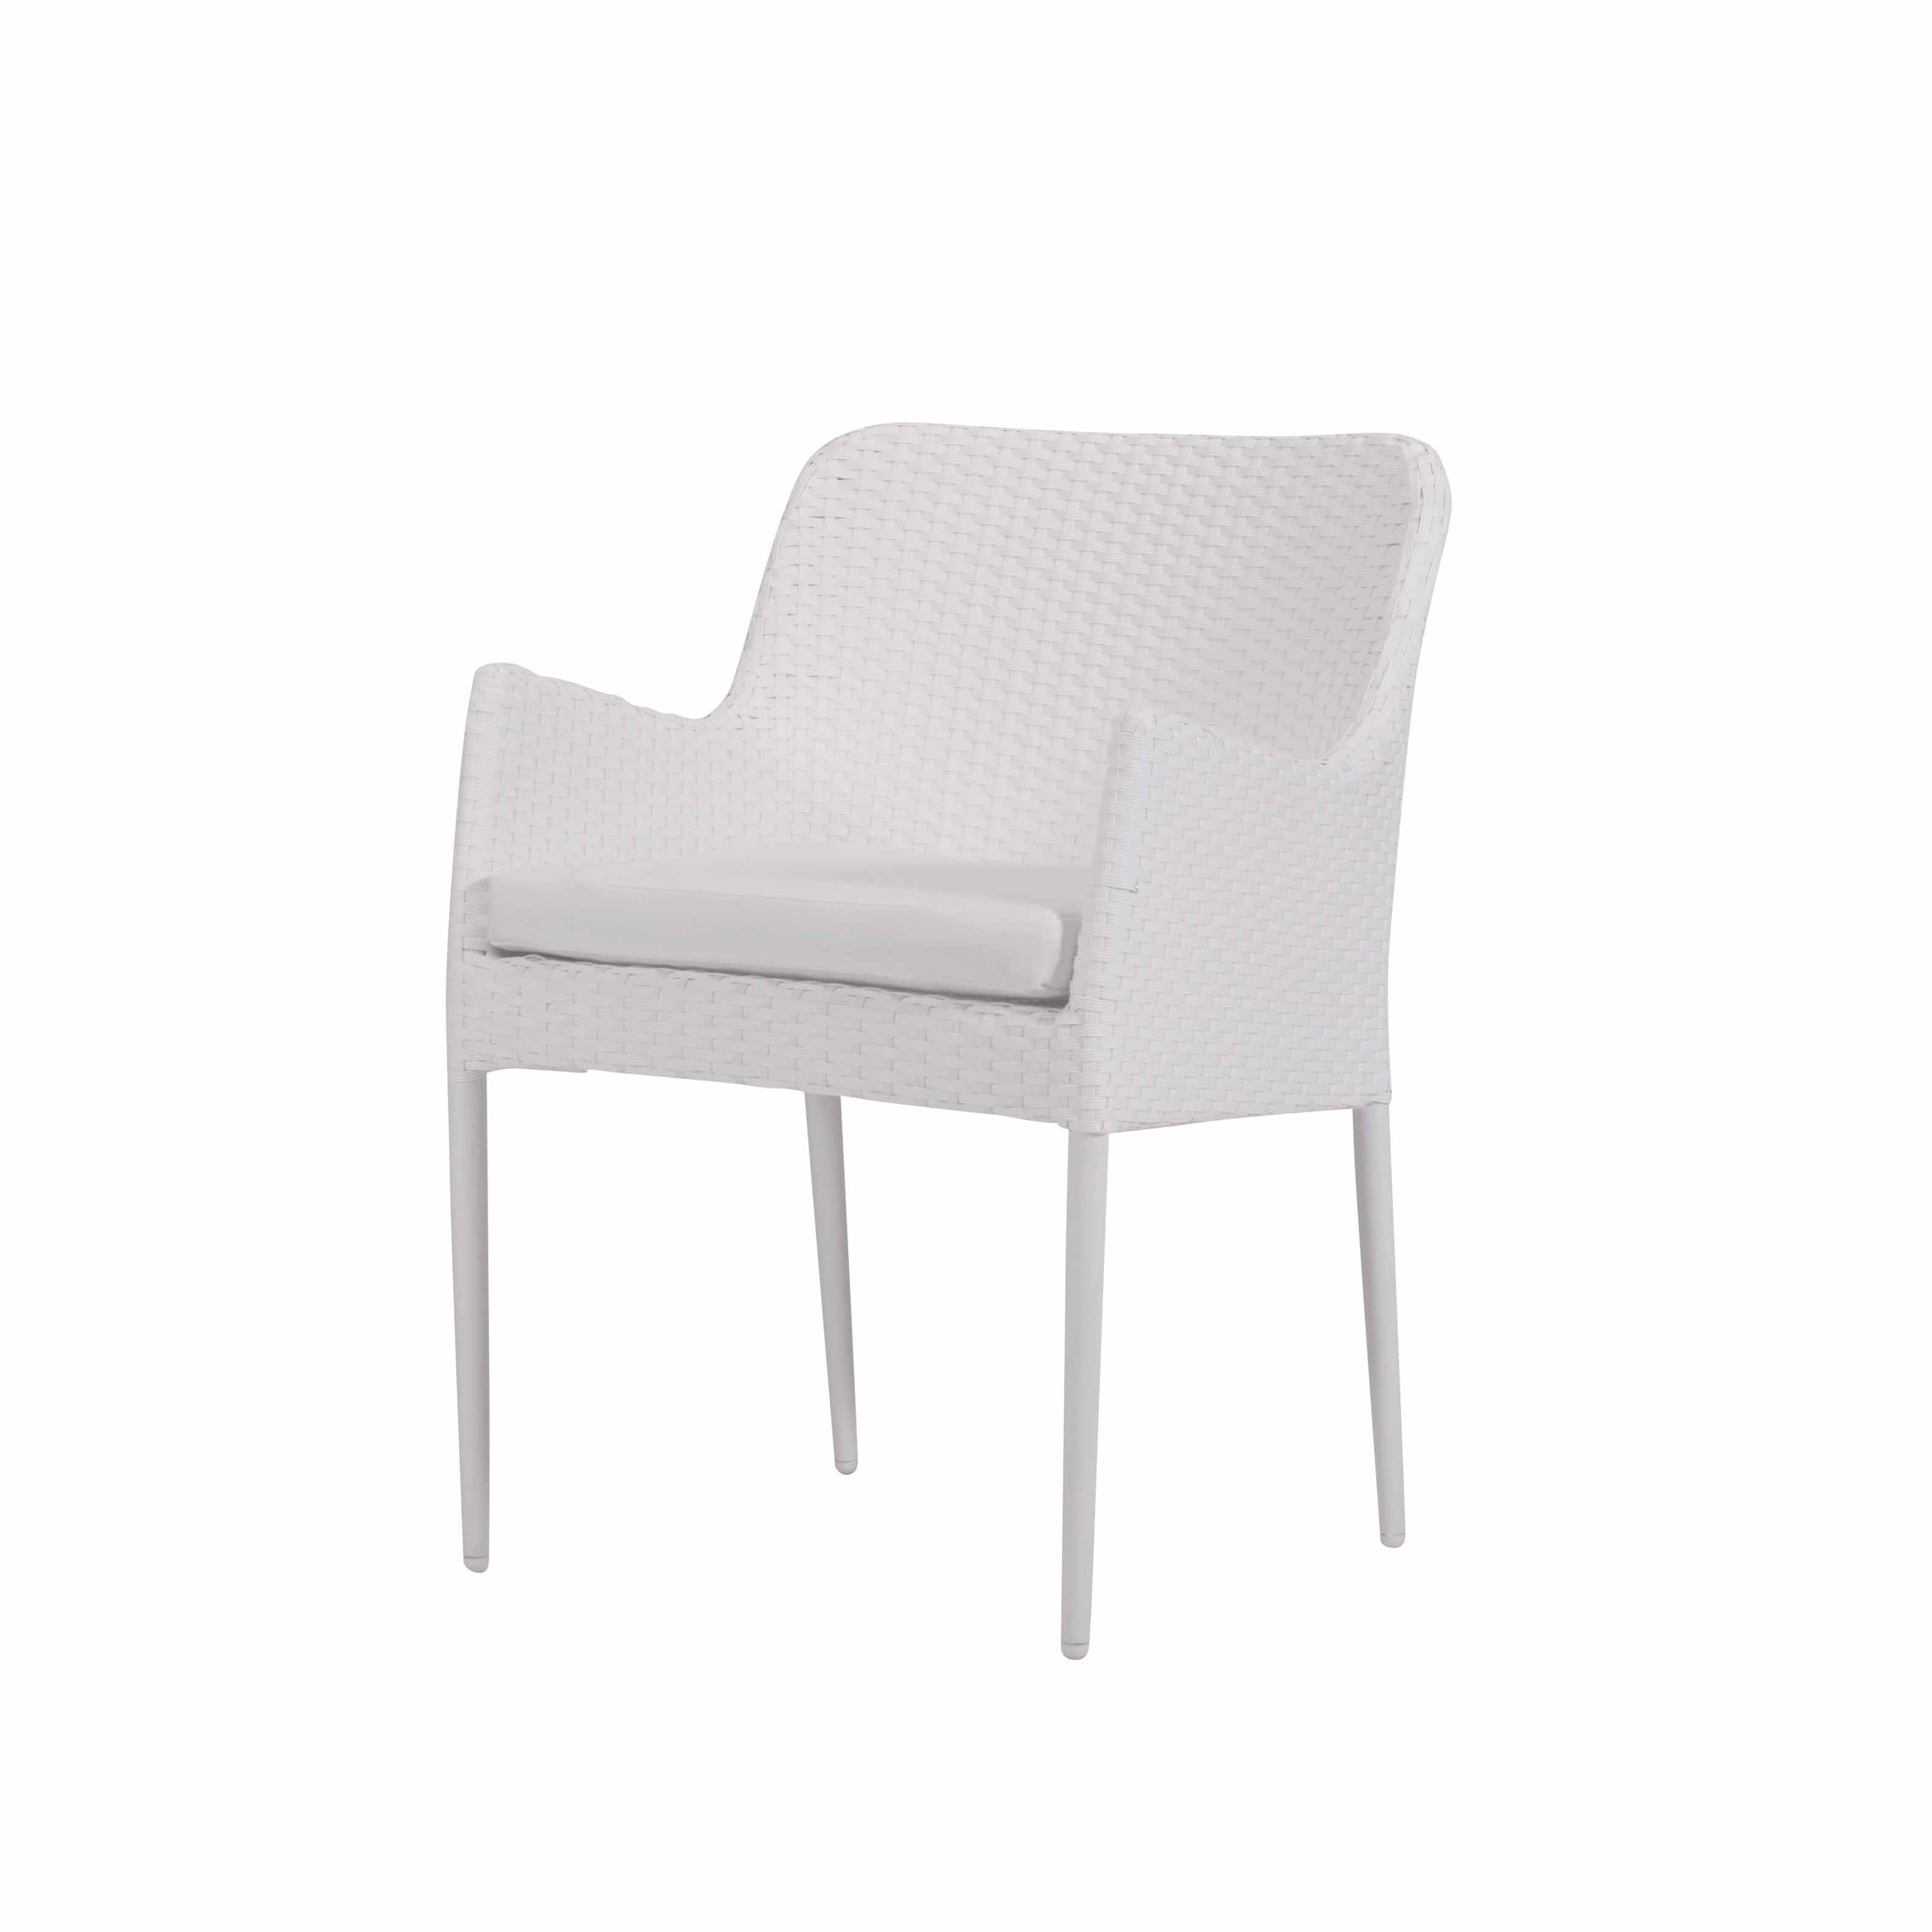 Molly rattan dining chair S1